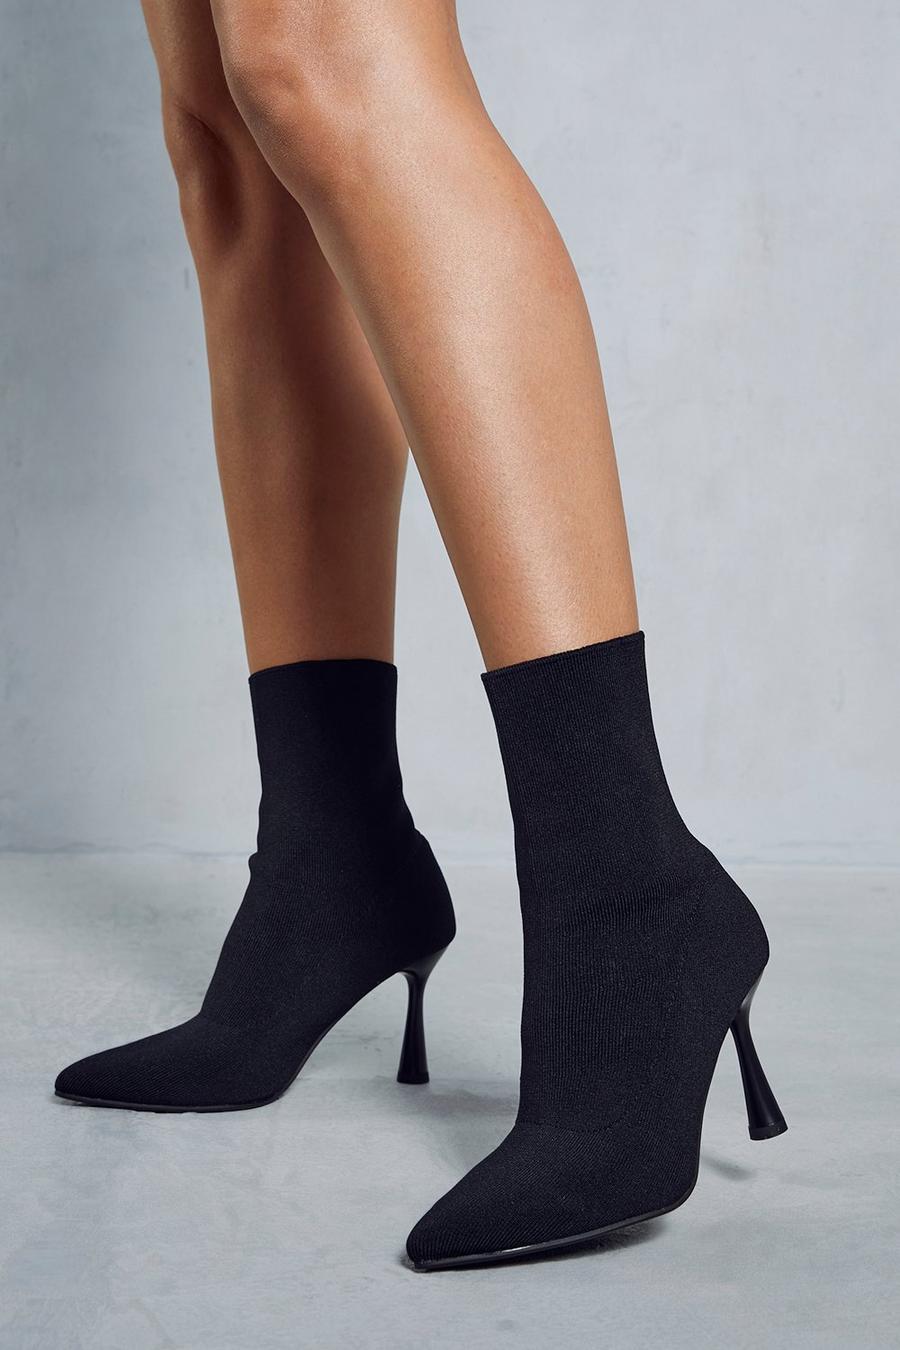 Black Pointed Knit High Heel Ankle Boots